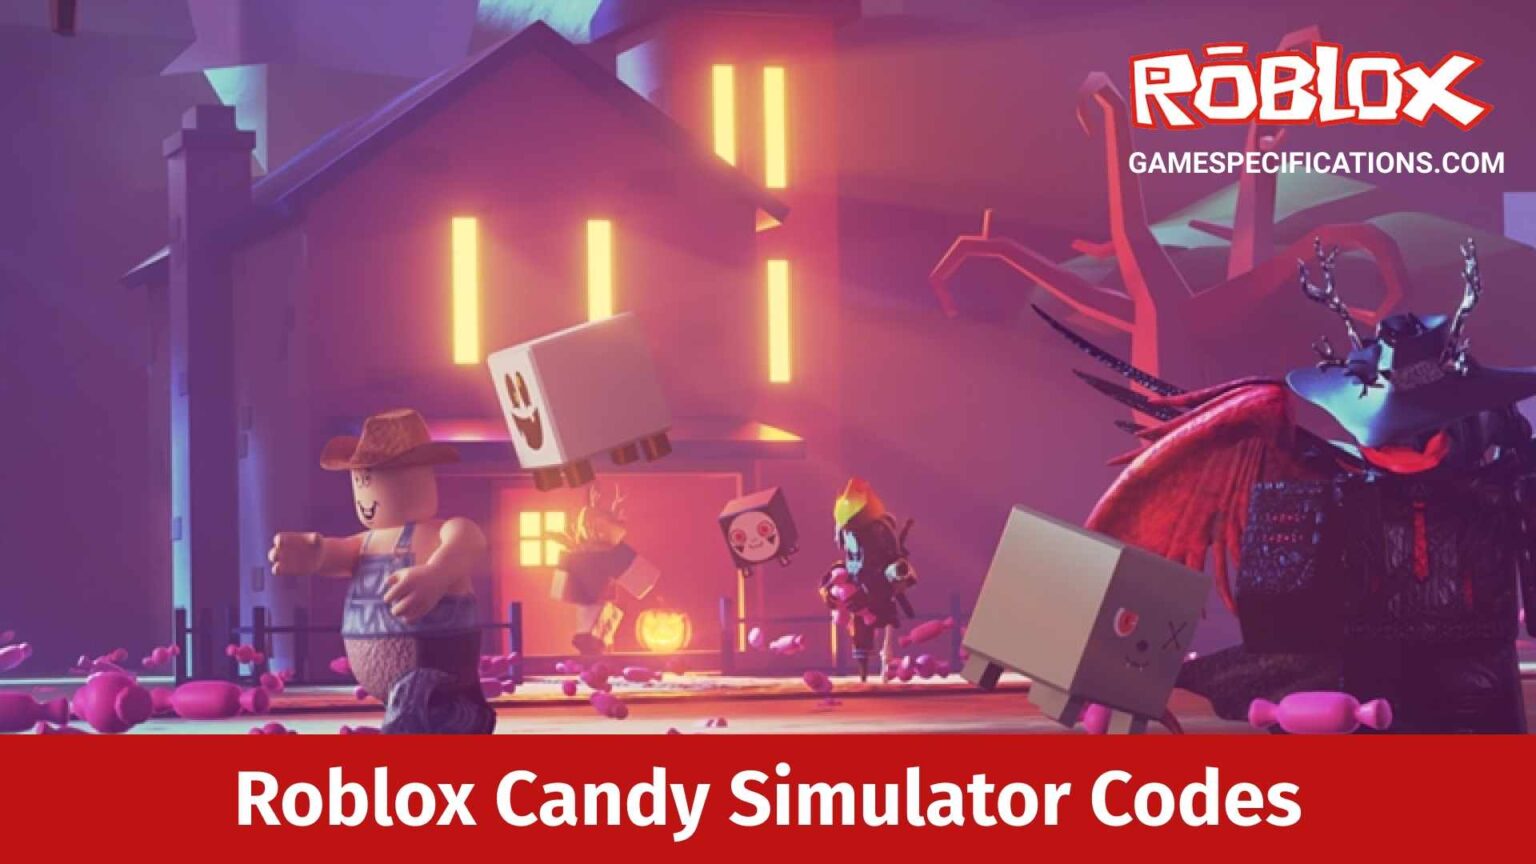 9-working-roblox-candy-simulator-codes-july-2022-game-specifications